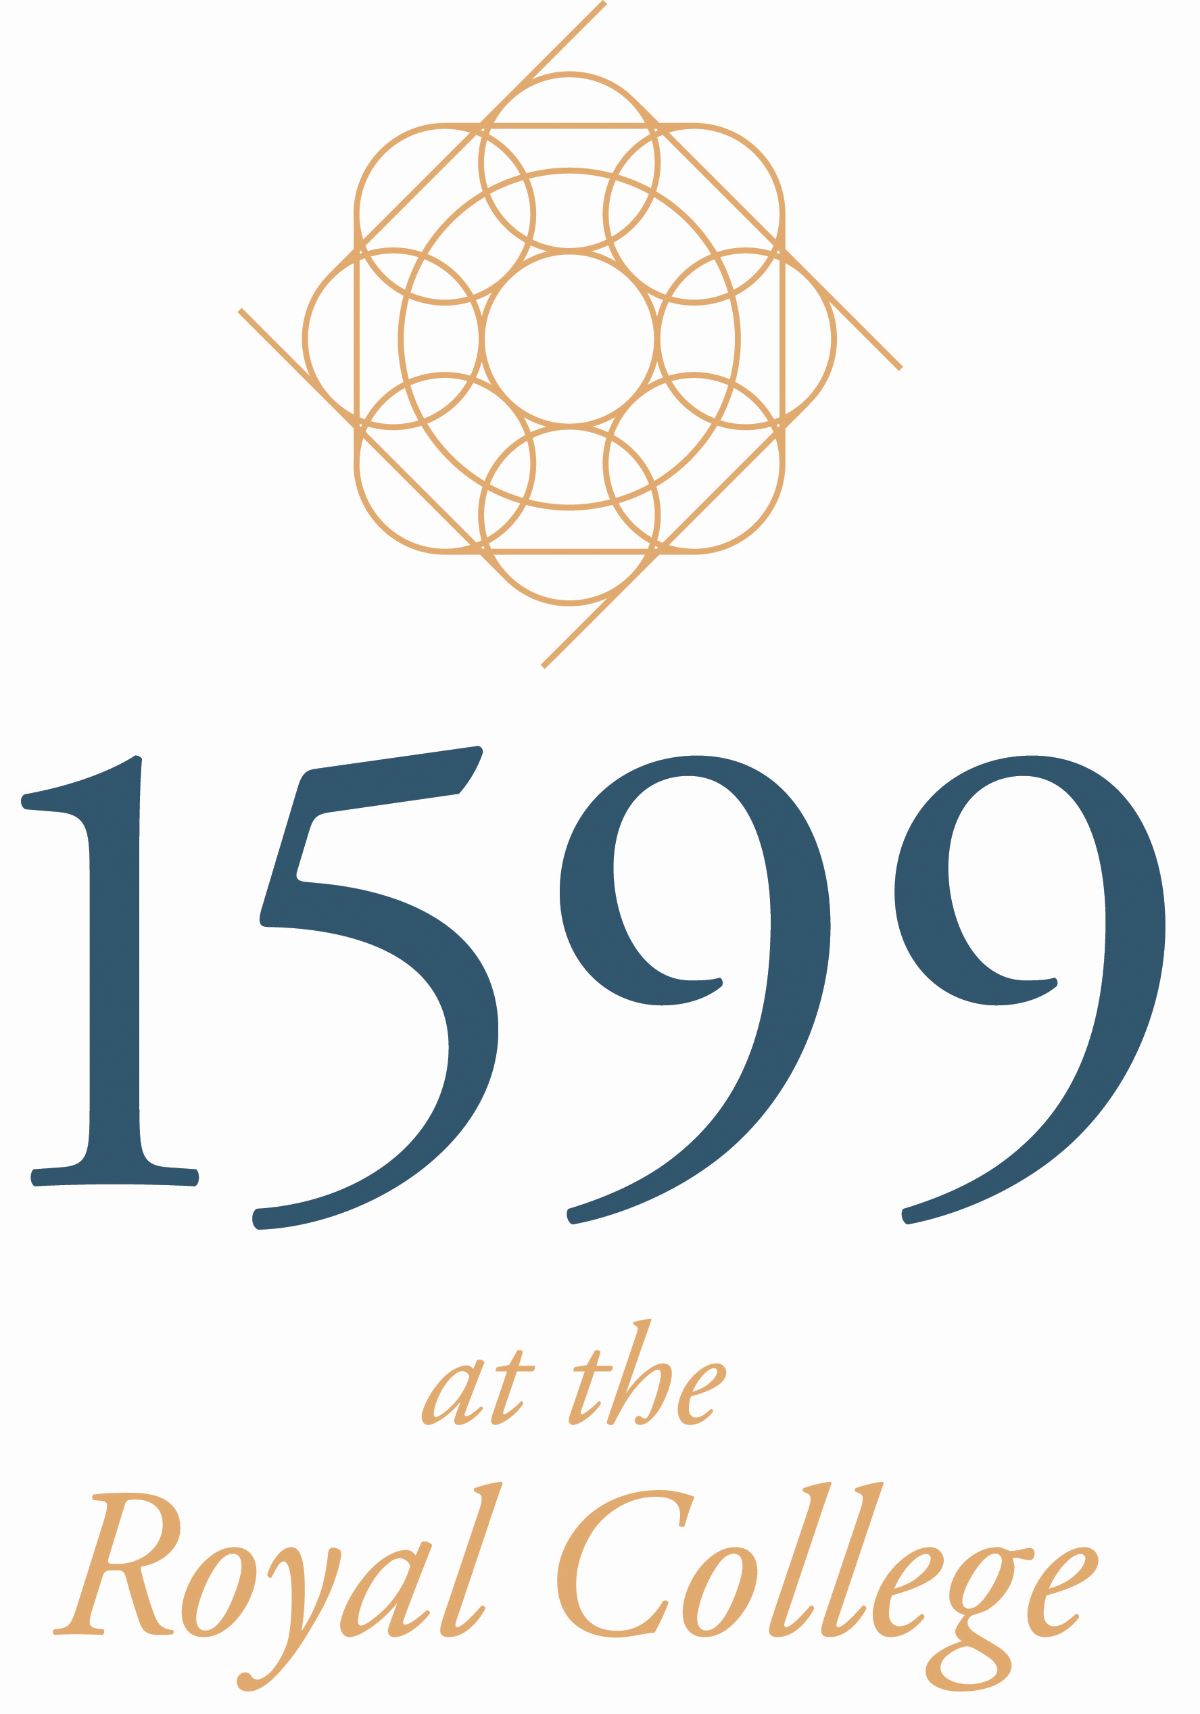 1599 at the Royal College-Image-55